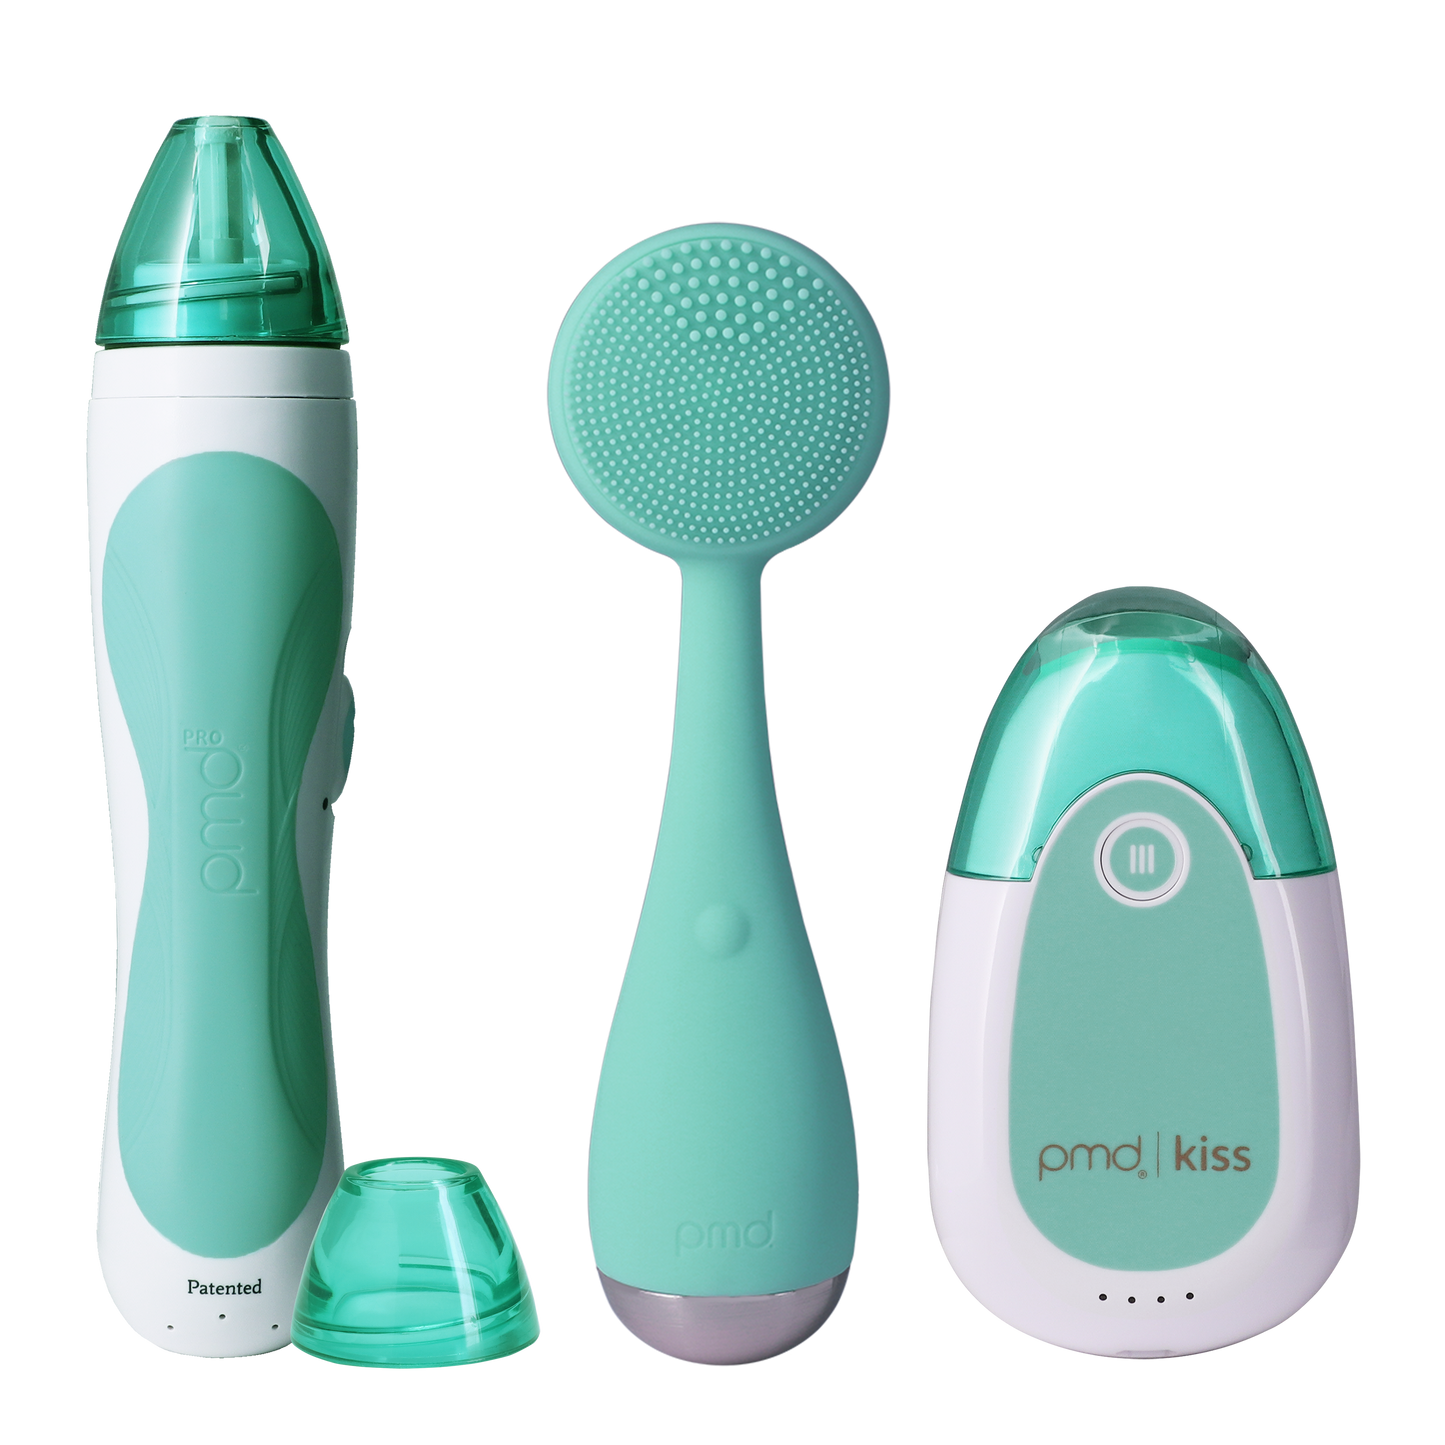 beauty_kit_teal_new?Personal Microderm Pro in Teal, PMD Kiss in Teal, and PMD Clean in Teal